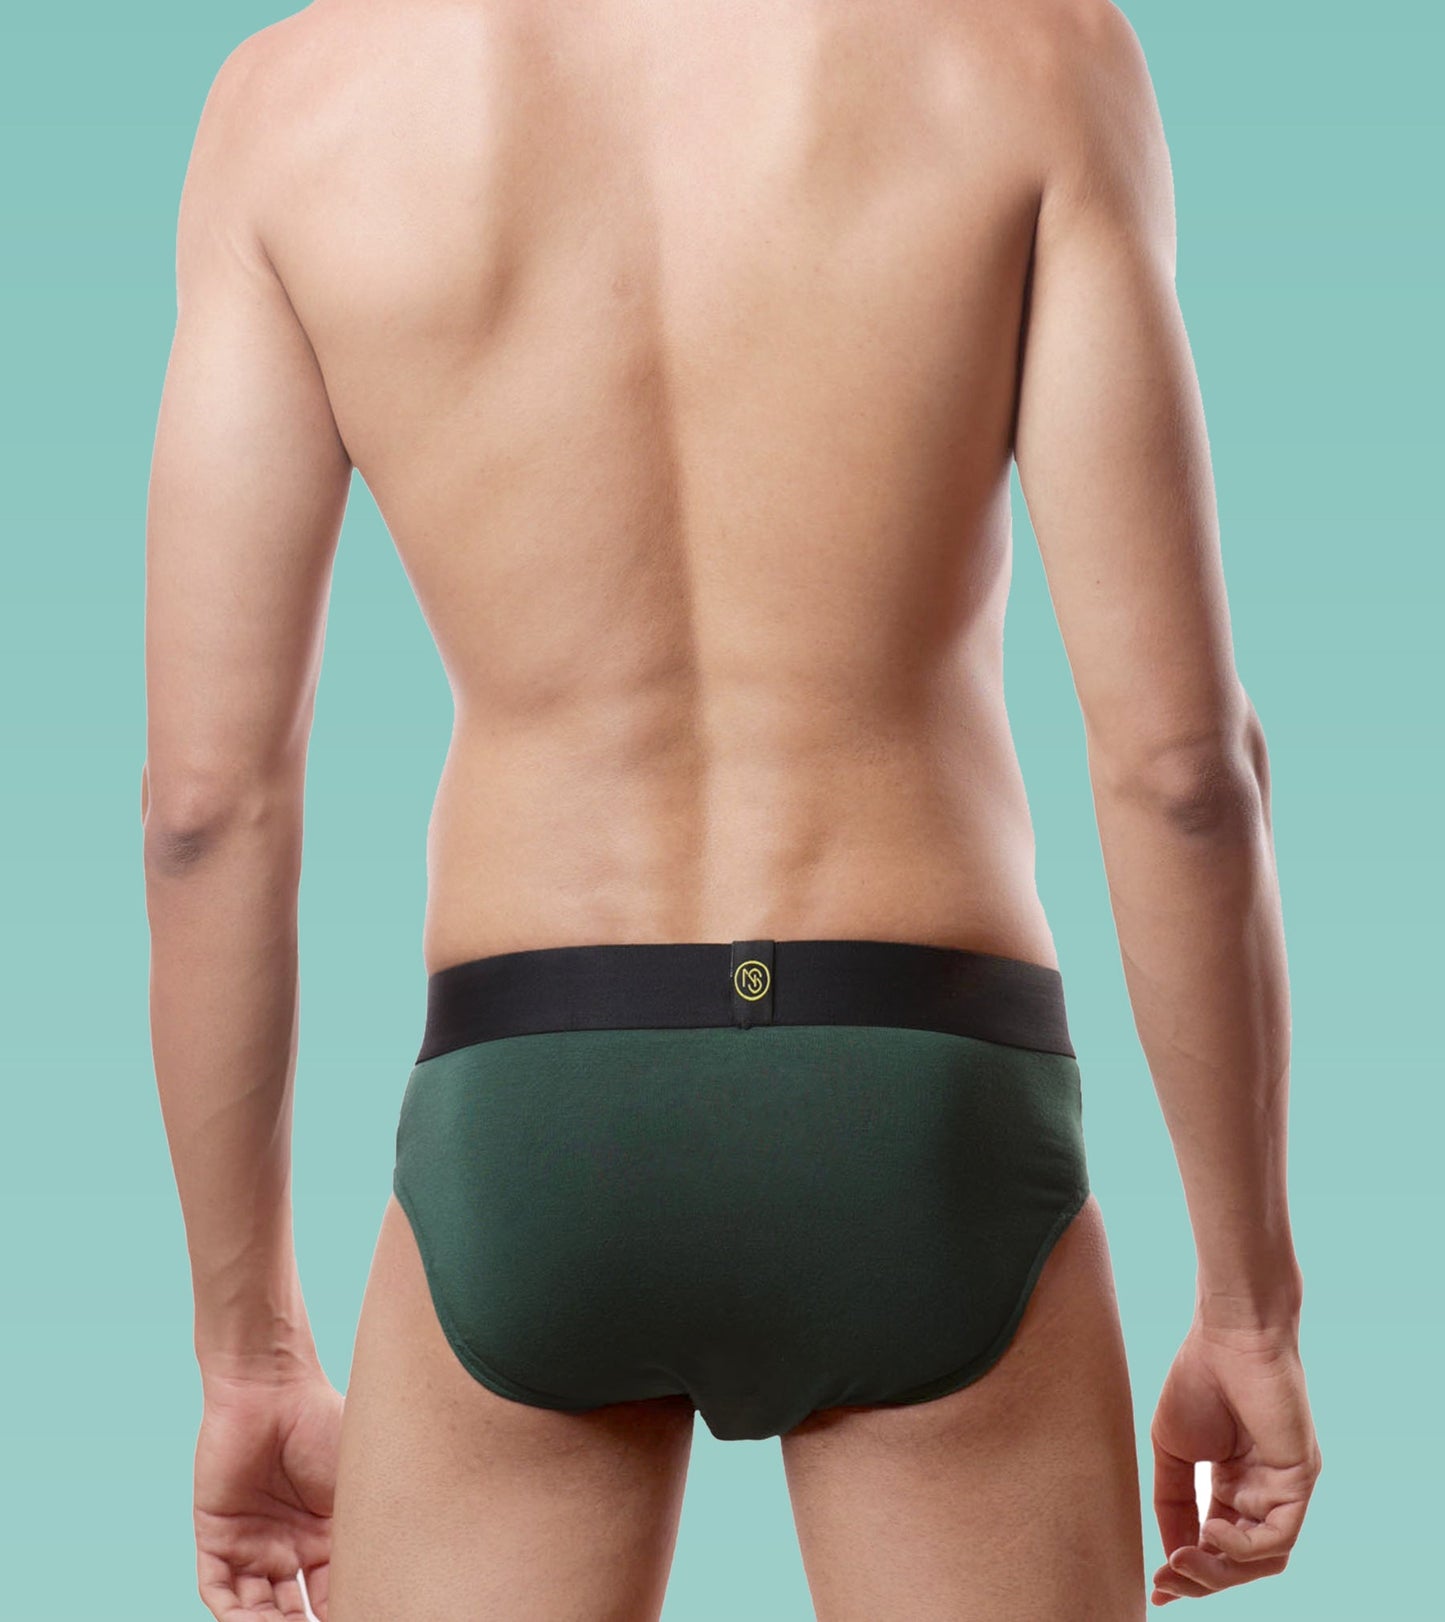 Men's Breathable Briefs- Pack of 3 (Pine Green, Martini Blue, Claret)